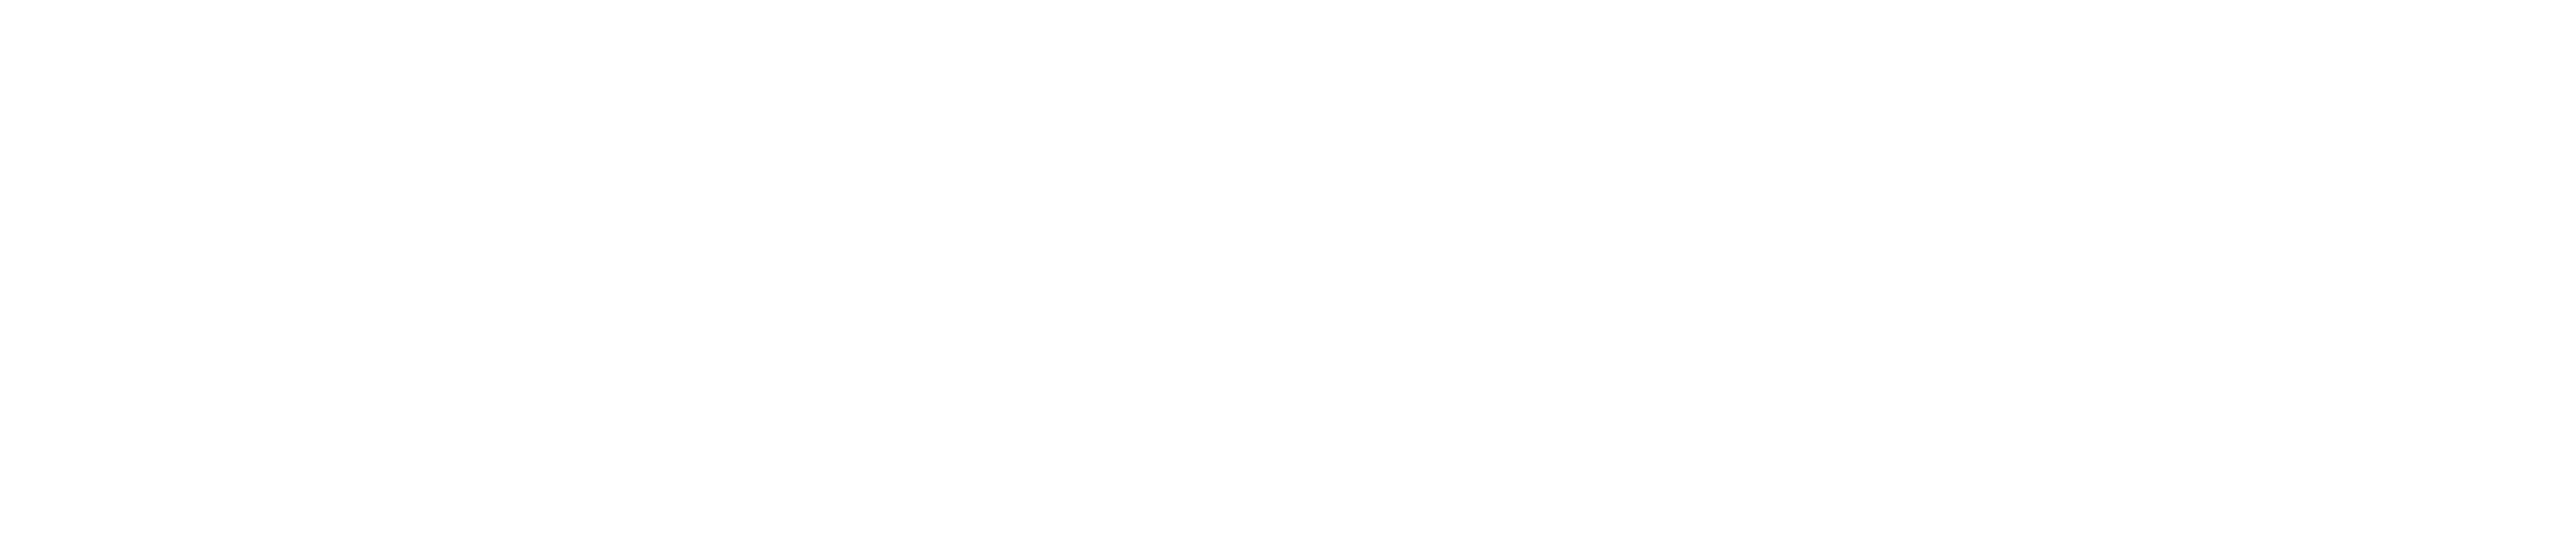 HealthCare Support Association of America